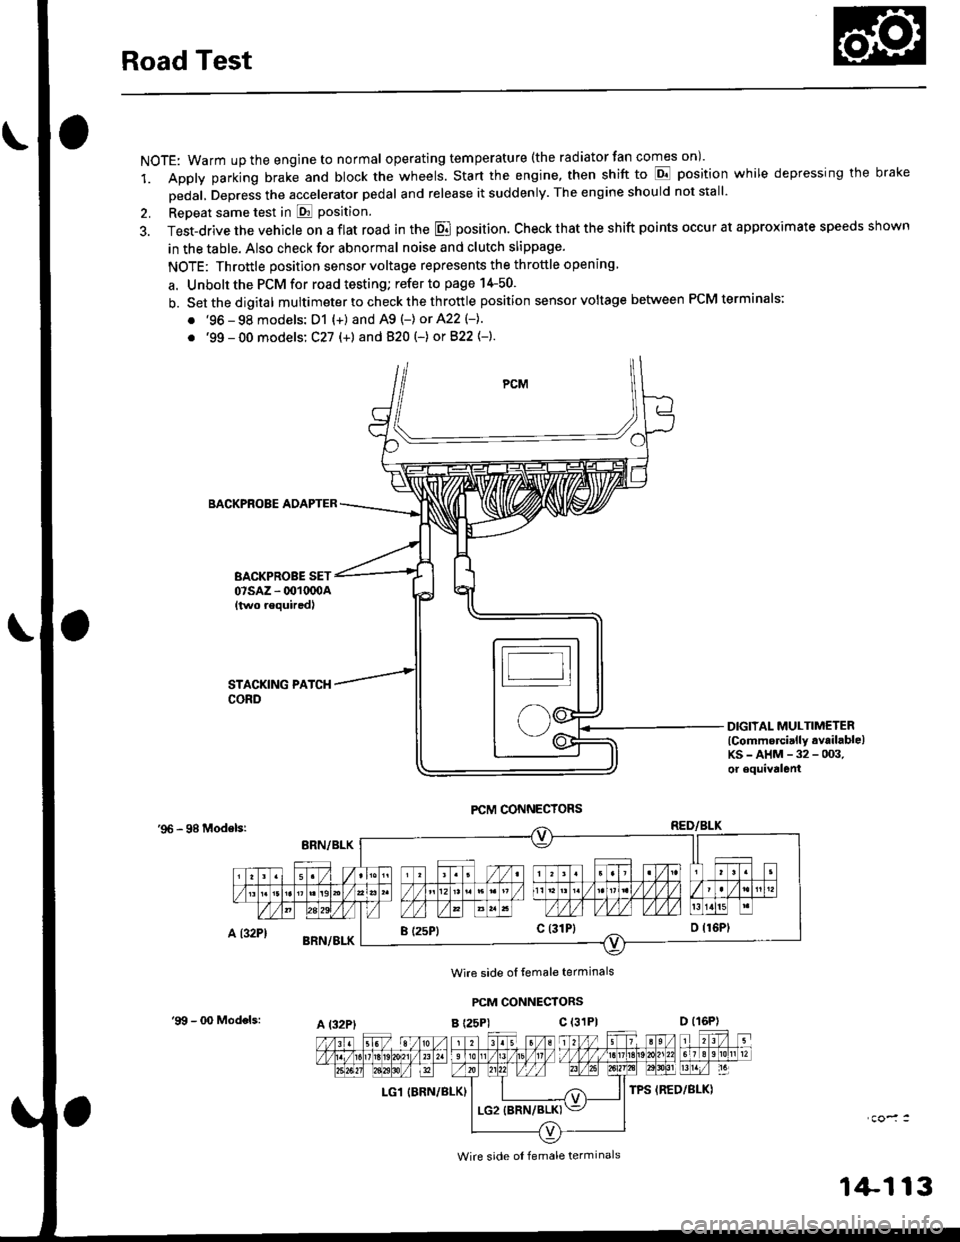 HONDA CIVIC 1997 6.G User Guide Road Test
NOTE: Warm up the engine to normal operating tem peratu re (the rad iator fan comes on )
1. Apply parking brake and block the wheels. Start the engine, then shift to E position while depres